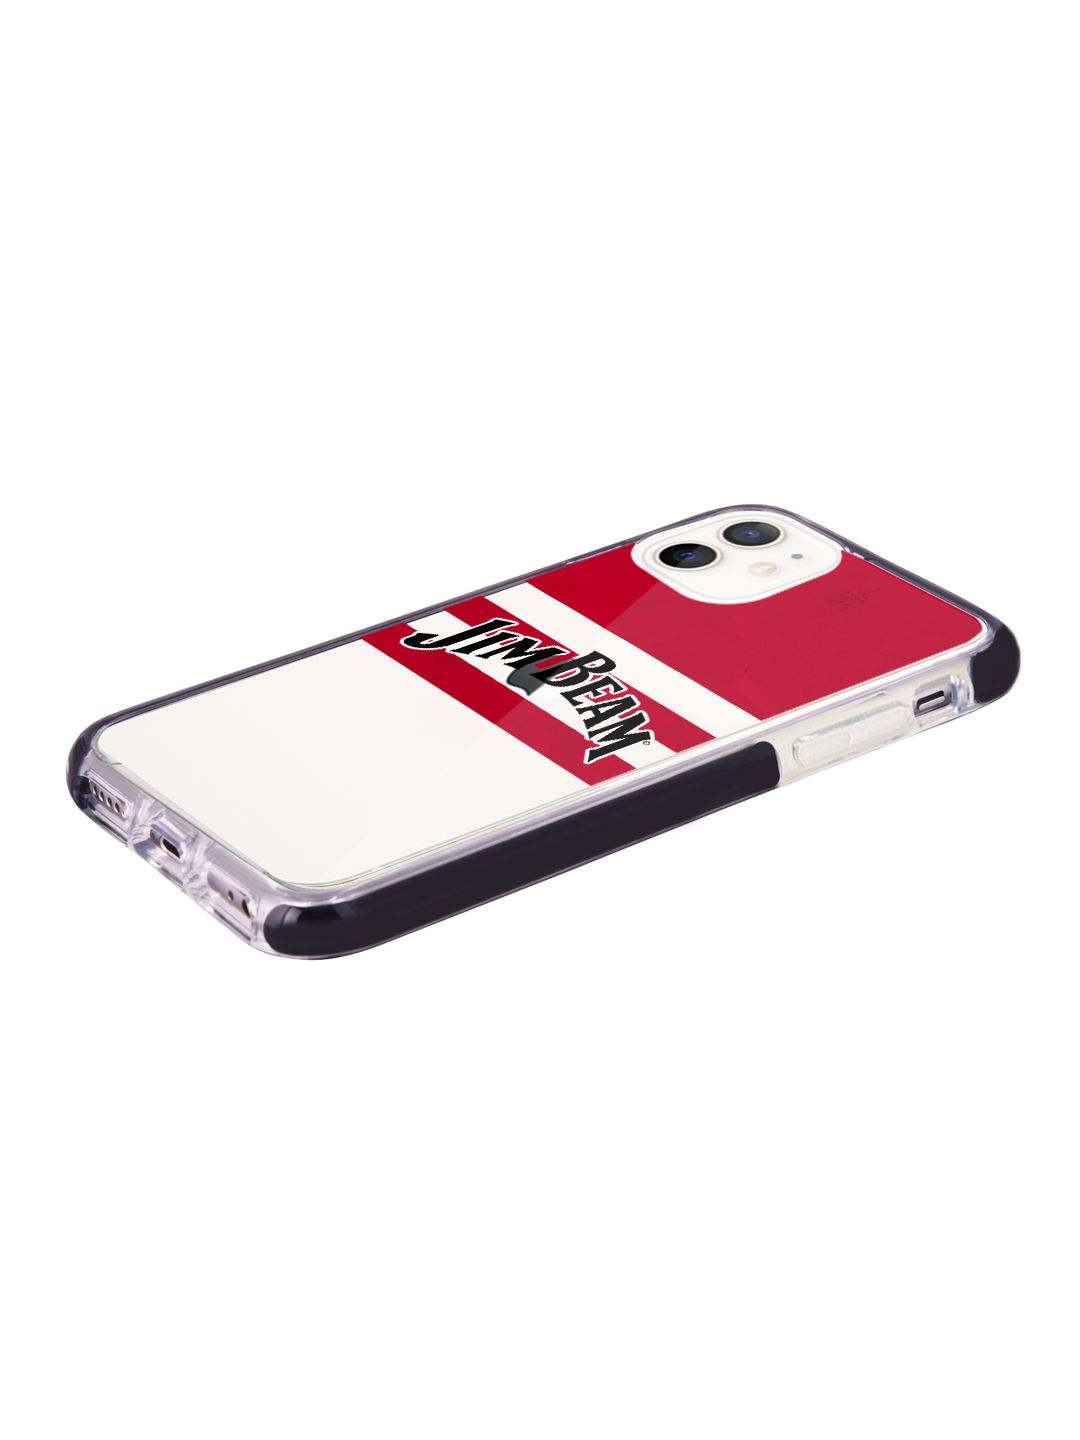 Jim Beam Red Stripes - Shield Case for iPhone 12 Mini